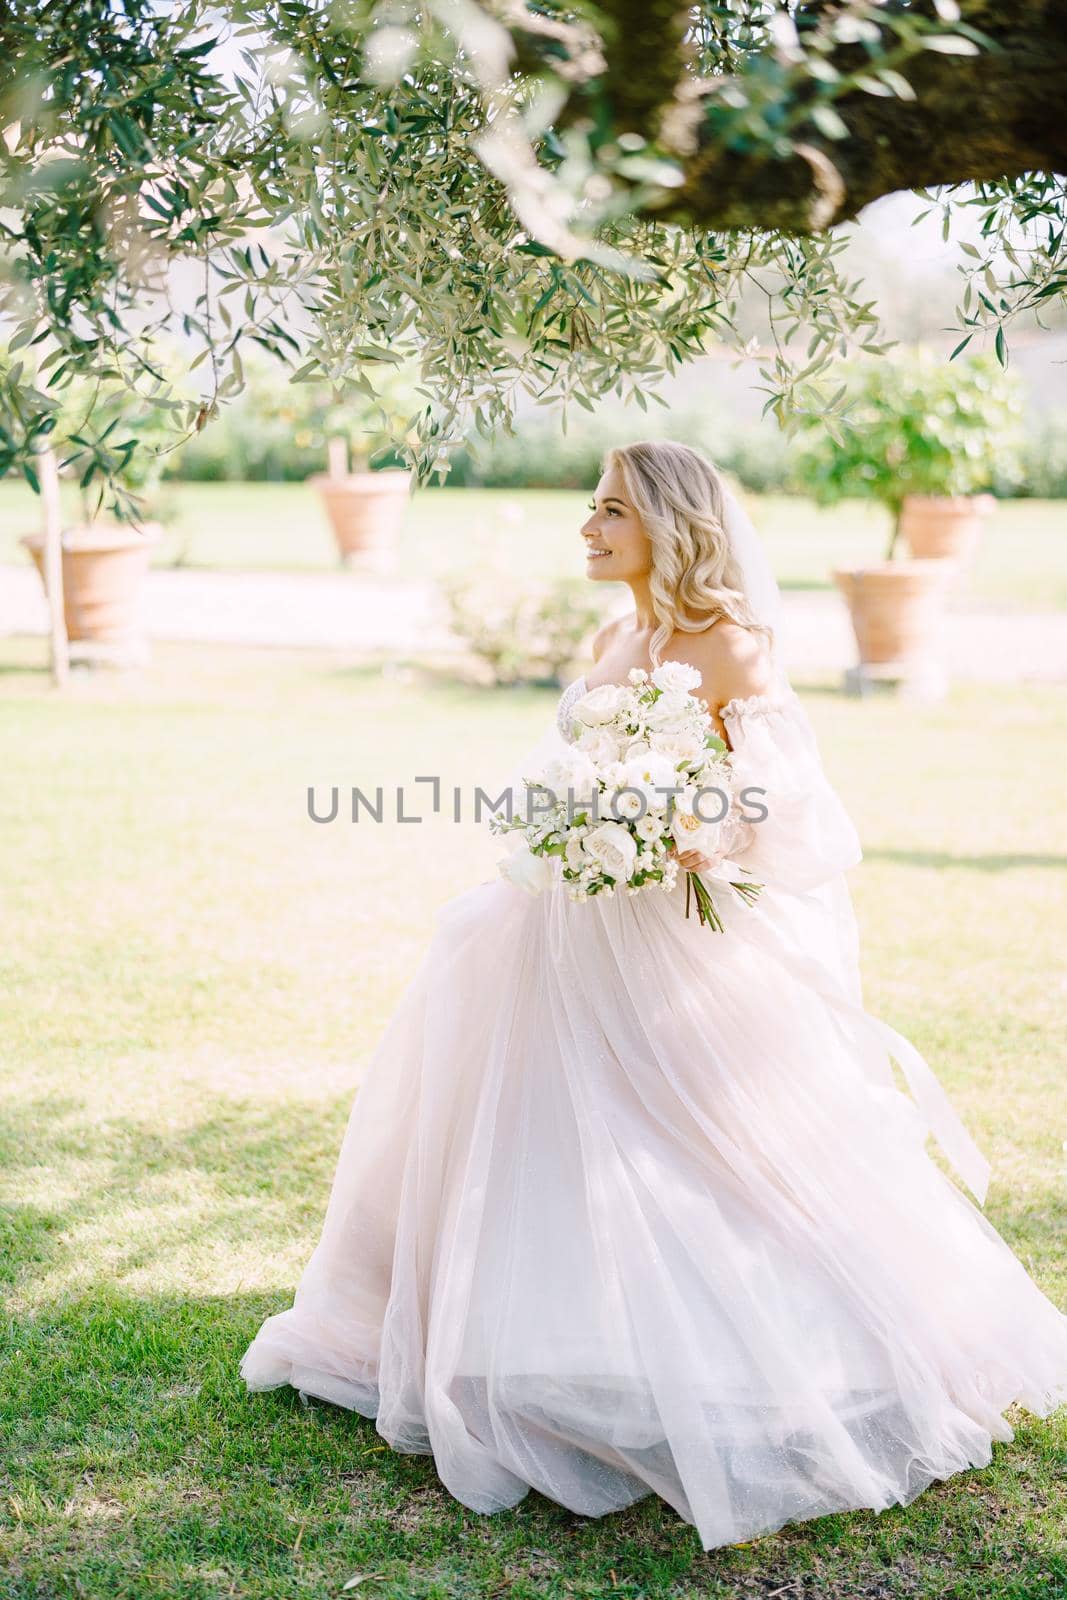 Wedding in Florence, Italy, in an old villa-winery. Bride in a white lush dress walks in the shade of olive trees an olive grove.